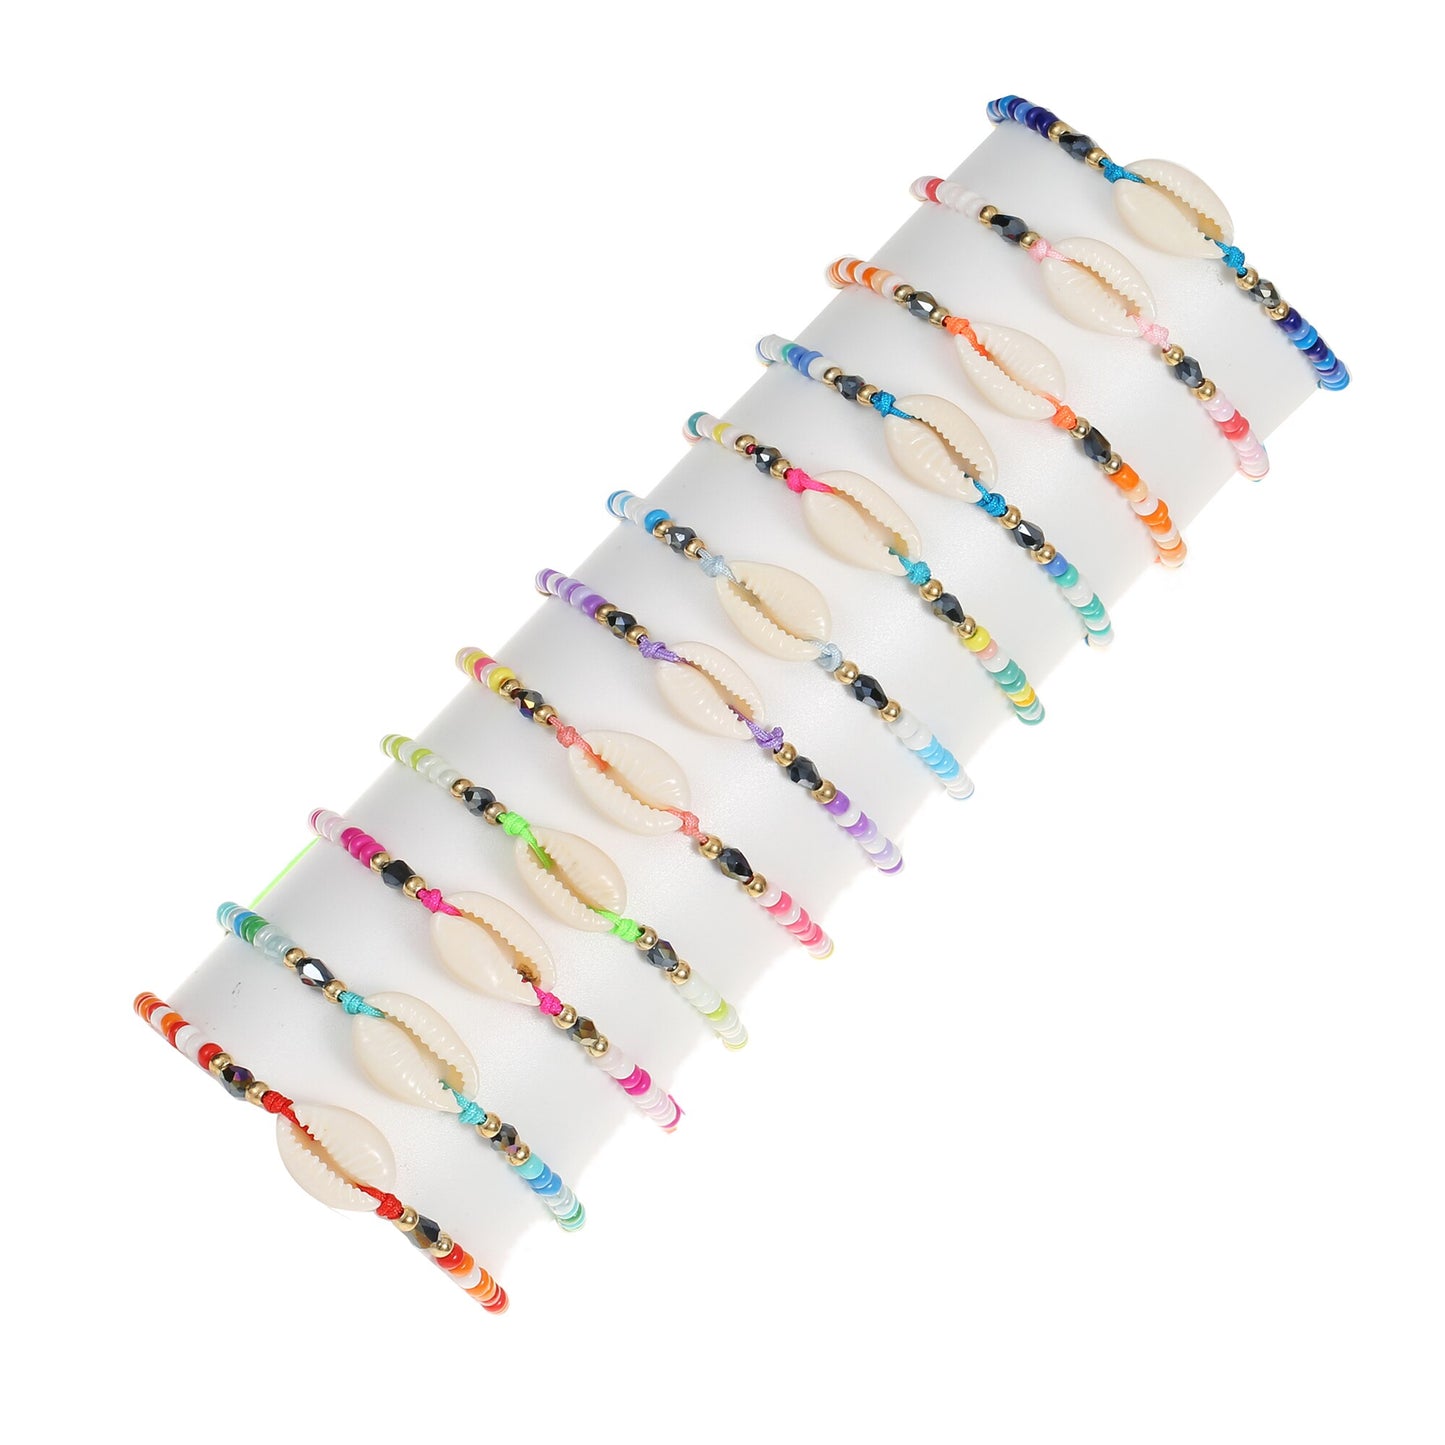 12pcs/Set Crystal Beads Shell Charms Bracelets Adjustable Handmade Woven Rope Chain Bracelet for Women Ethnic Cuff Jewelry